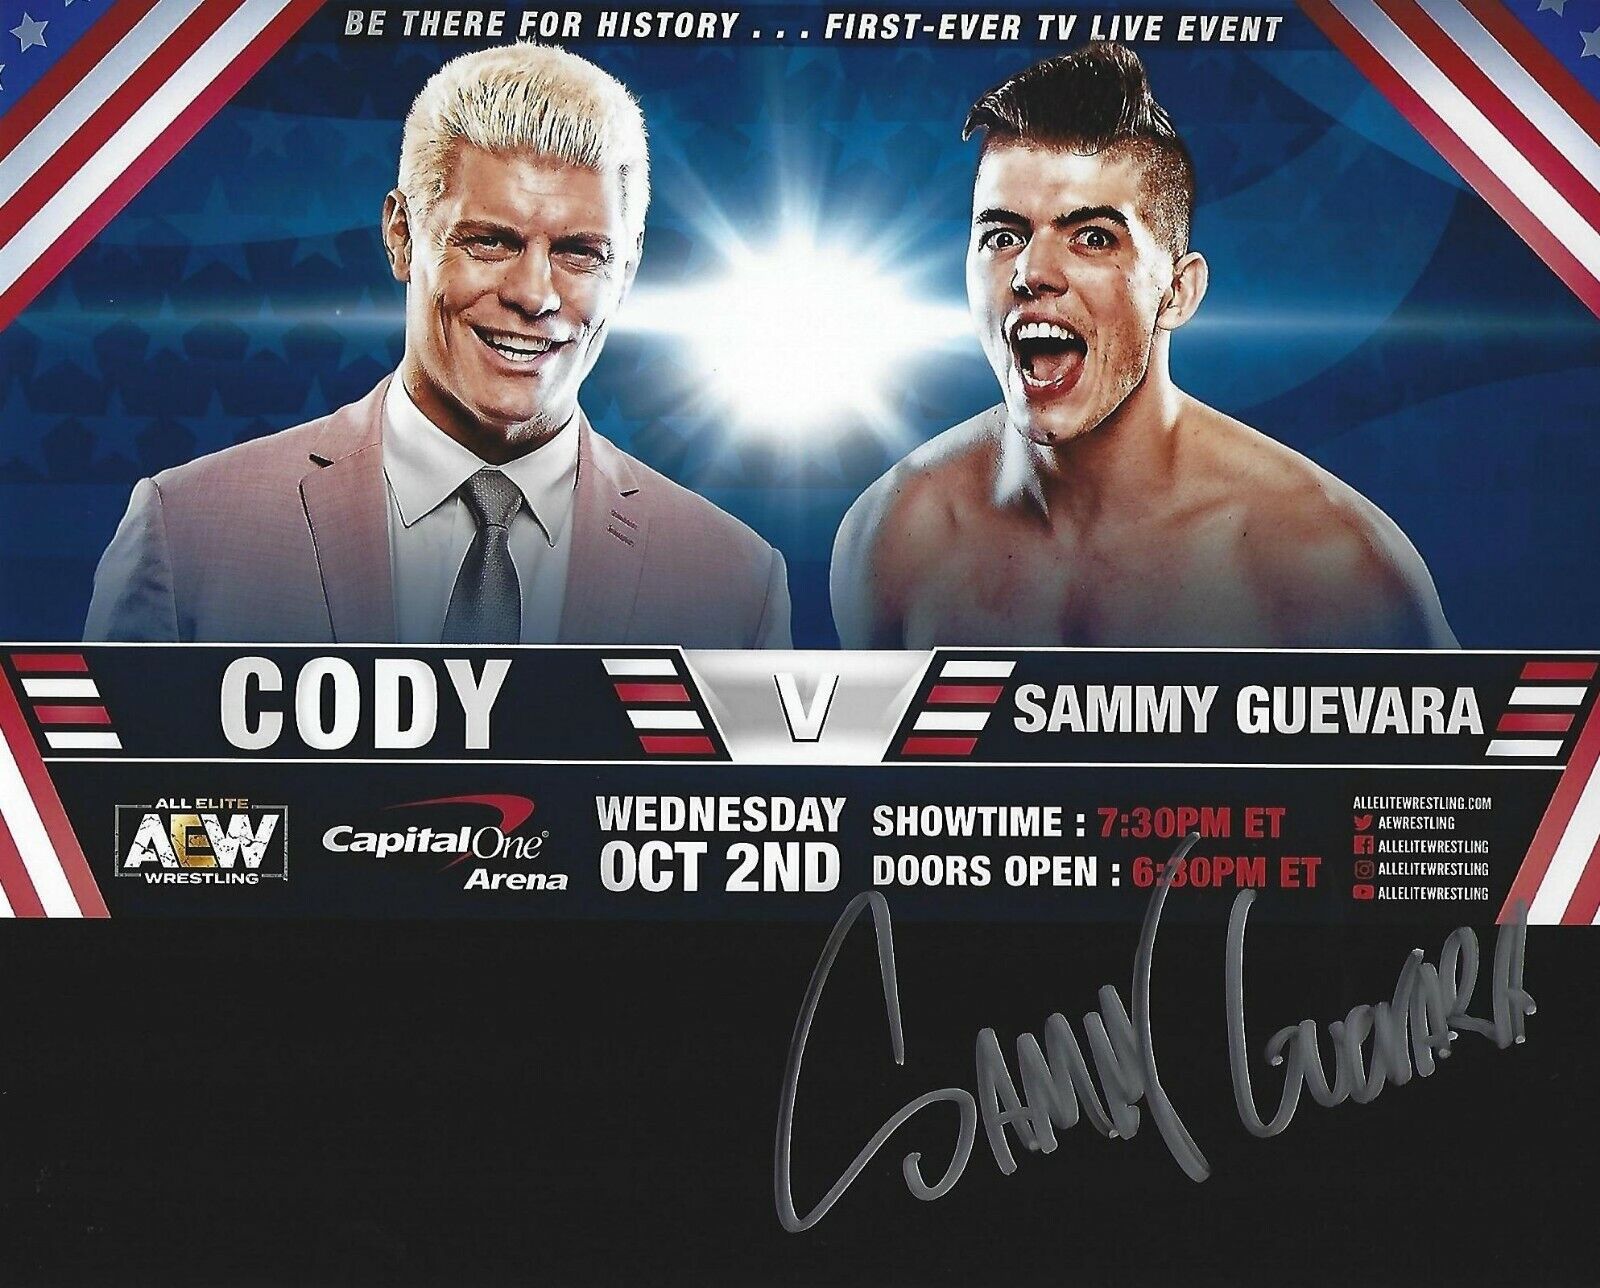 Sammy Guevara Signed 8x10 Photo Poster painting Picture Autograph AEW 1st TV Match v Cody Rhodes